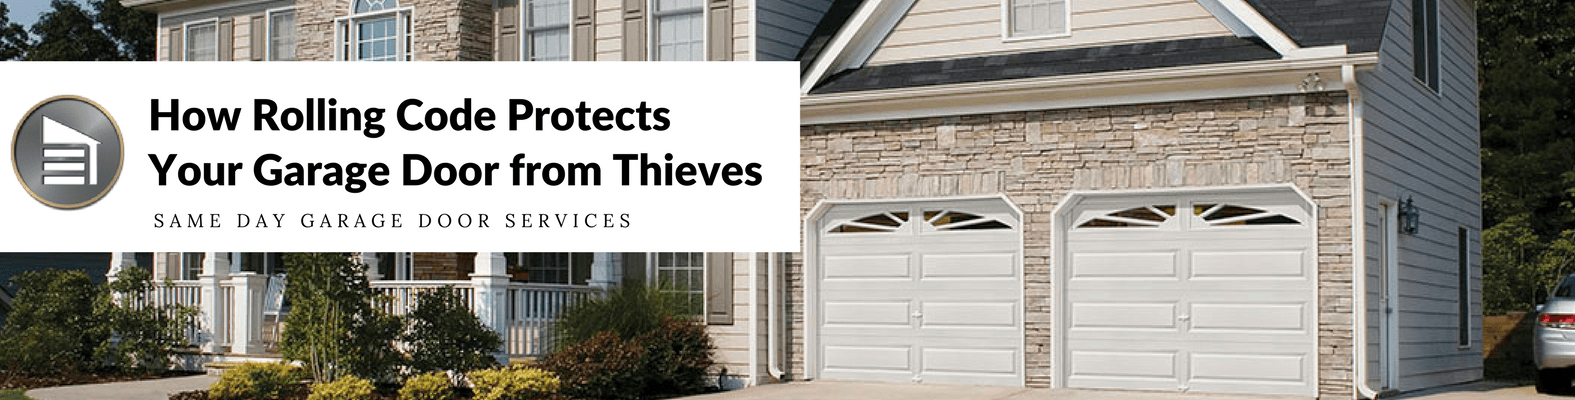 How rolling code protects Your garage door from thieves